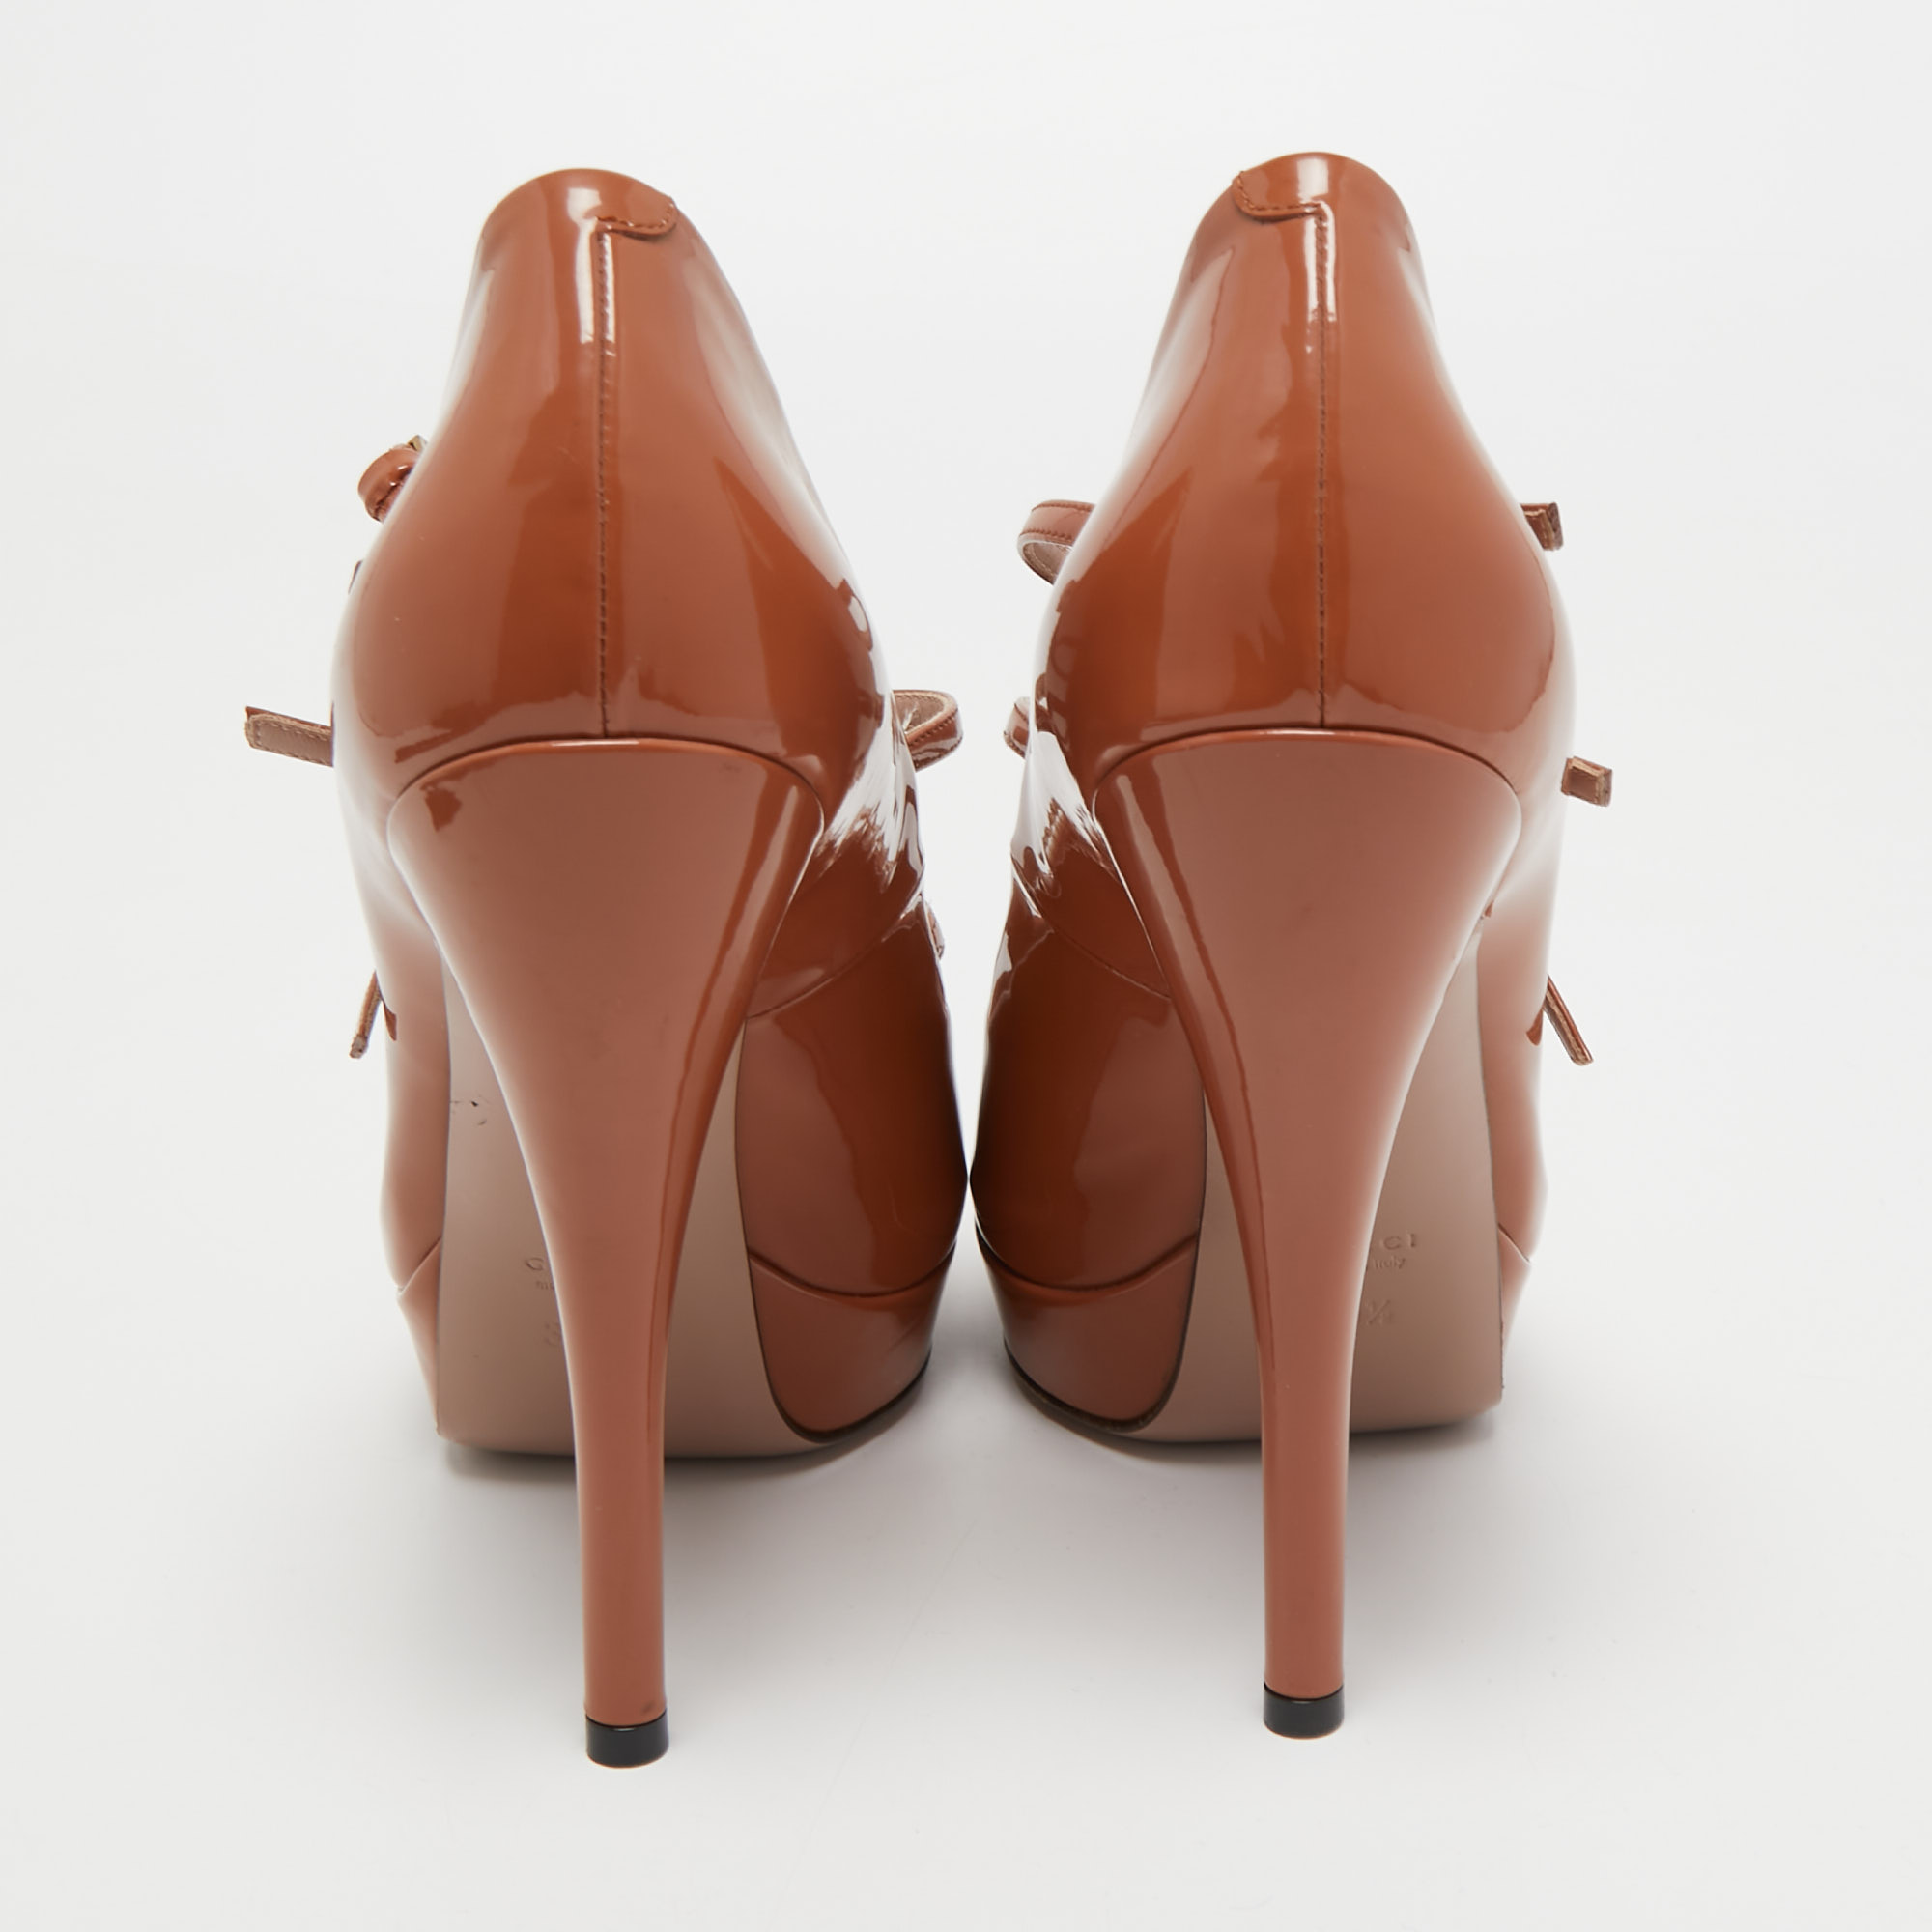 Gucci Brown Patent Leather Lisbeth Peep Toe Pumps Size 39.5